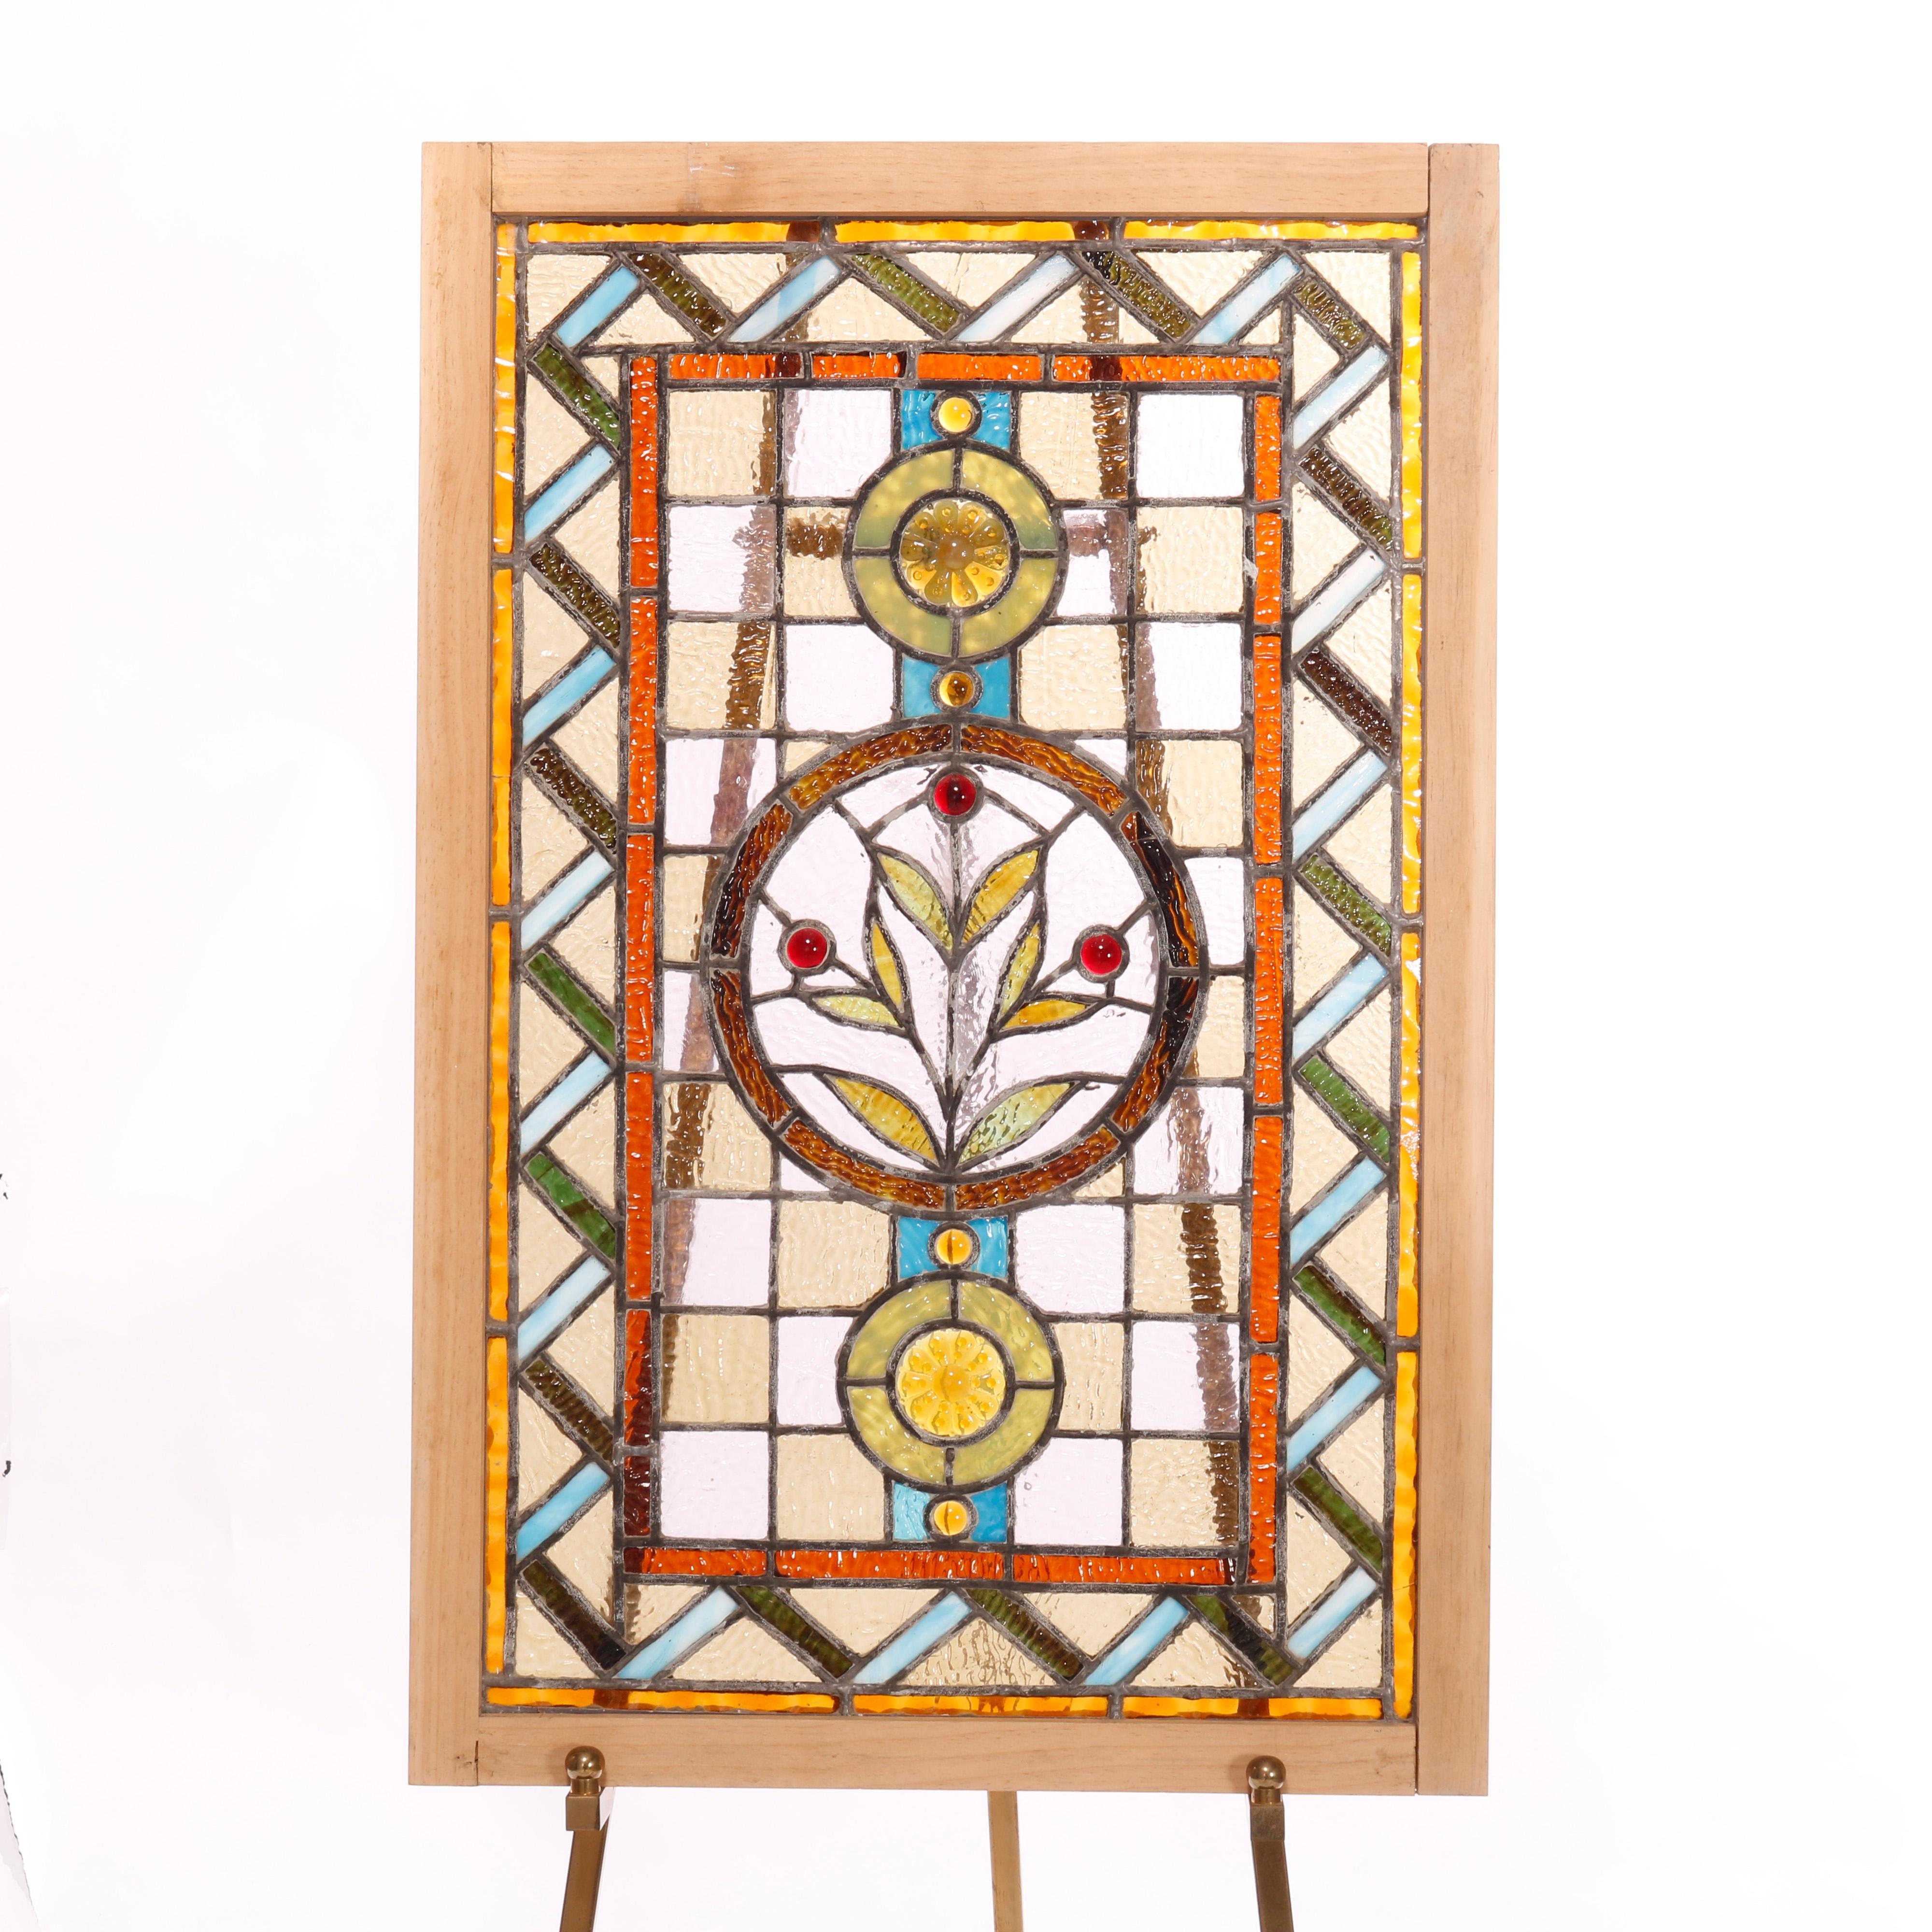 An antique pair of Arts & Crafts leaded and jeweled stained glass windows offer central stylized floral design with stylized ribbon bordering, seated in wood sashes, c1910

Measures - 35